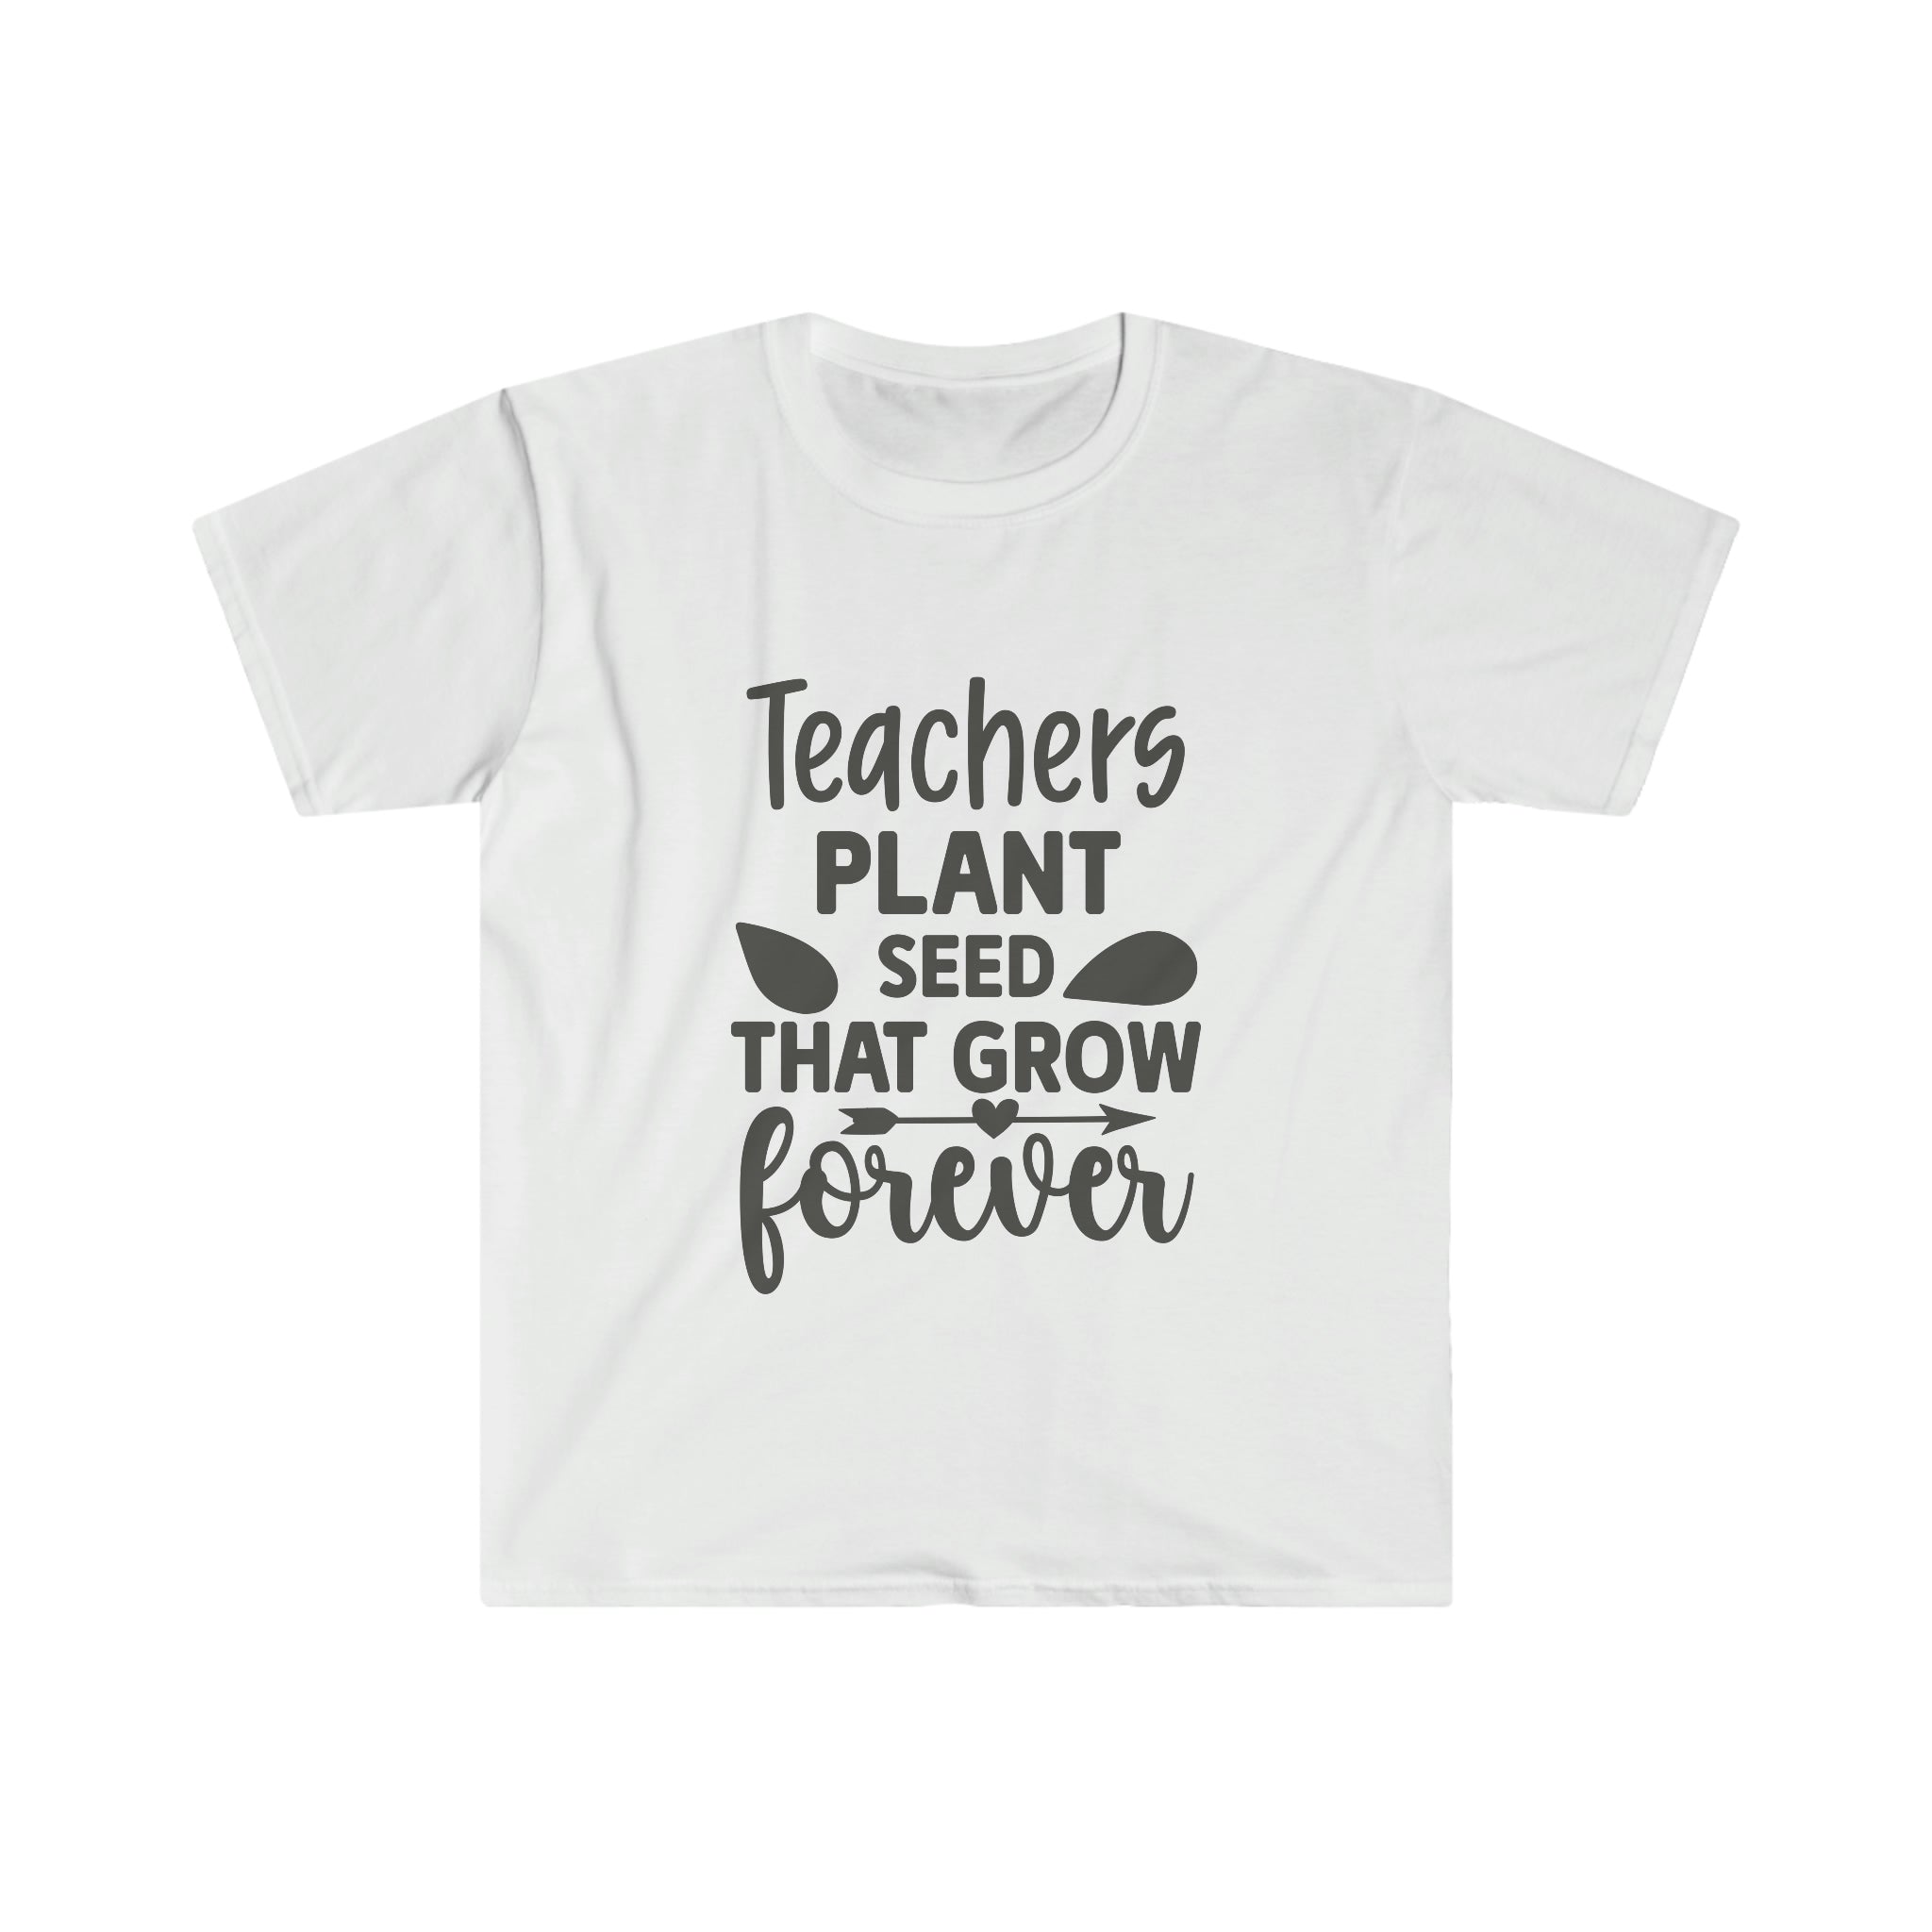 A Teacher Plant Seeds T-Shirt featuring a message that highlights the powerful impact of teachers, as they plant seeds that grow forever.